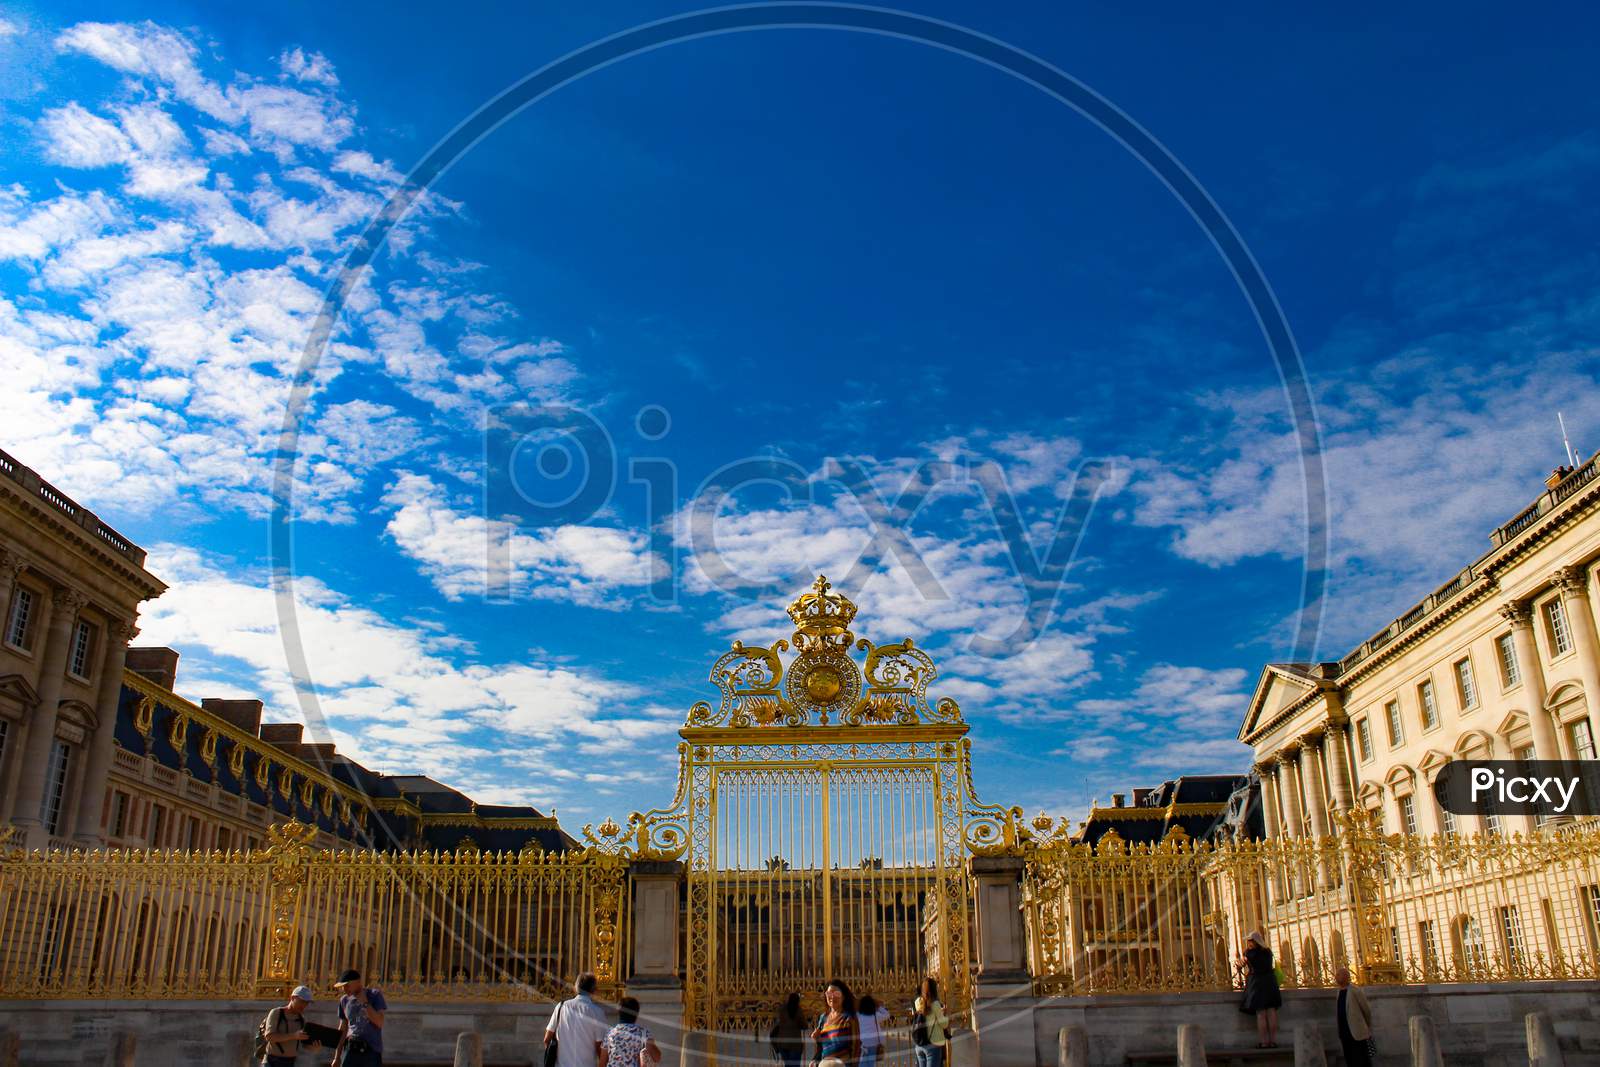 The Palace Of Versailles Was The Principal Royal Residence Of France